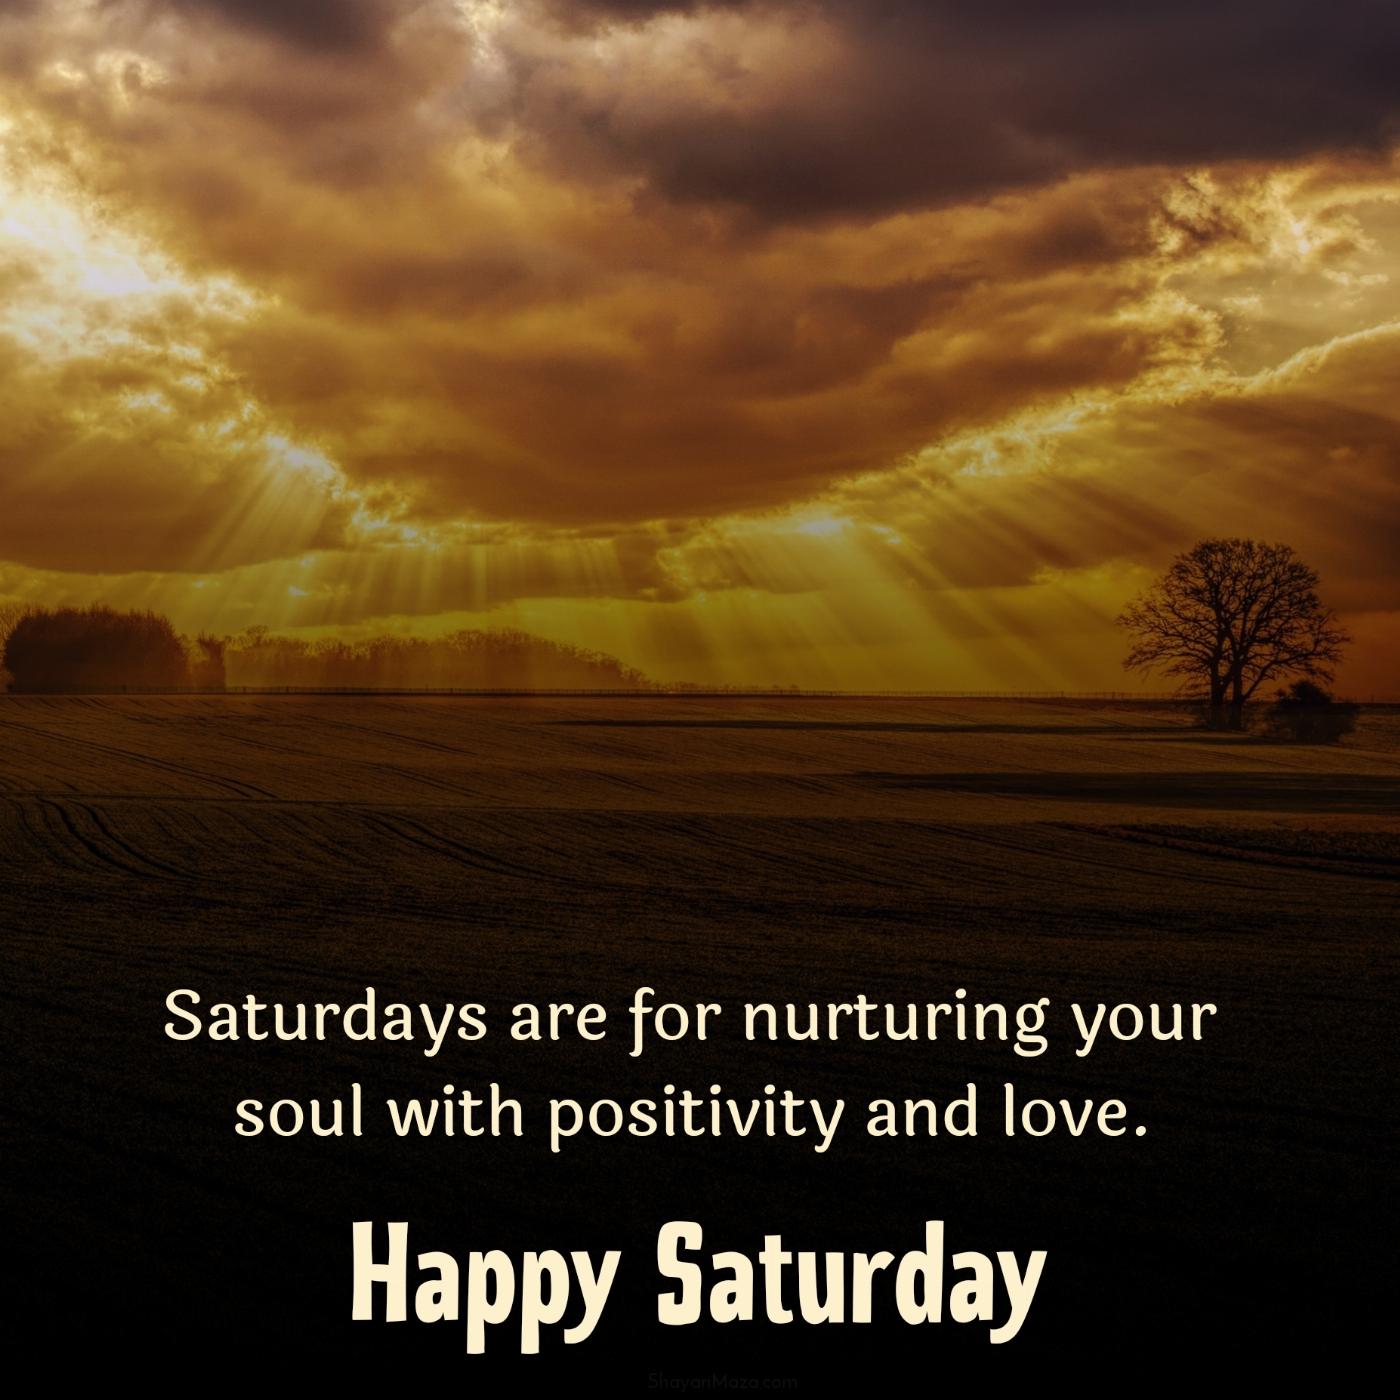 Saturdays are for nurturing your soul with positivity and love